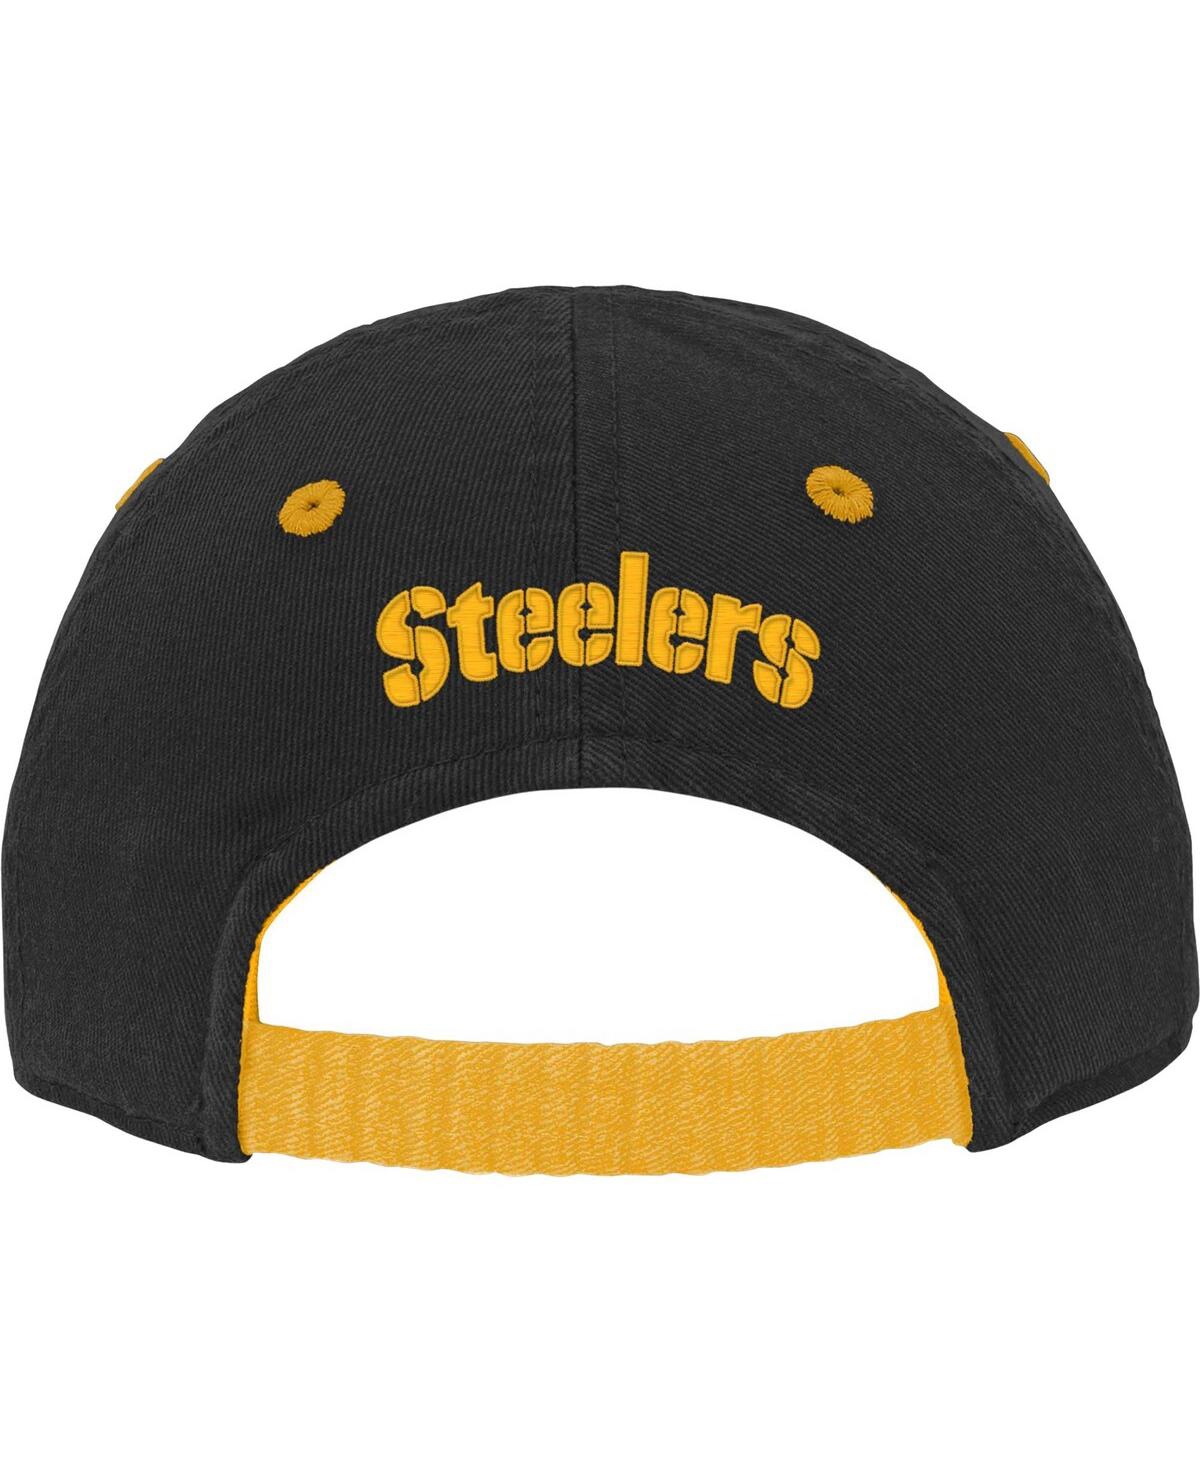 Shop Outerstuff Infant Boys And Girls Black Pittsburgh Steelers Team Slouch Flex Hat